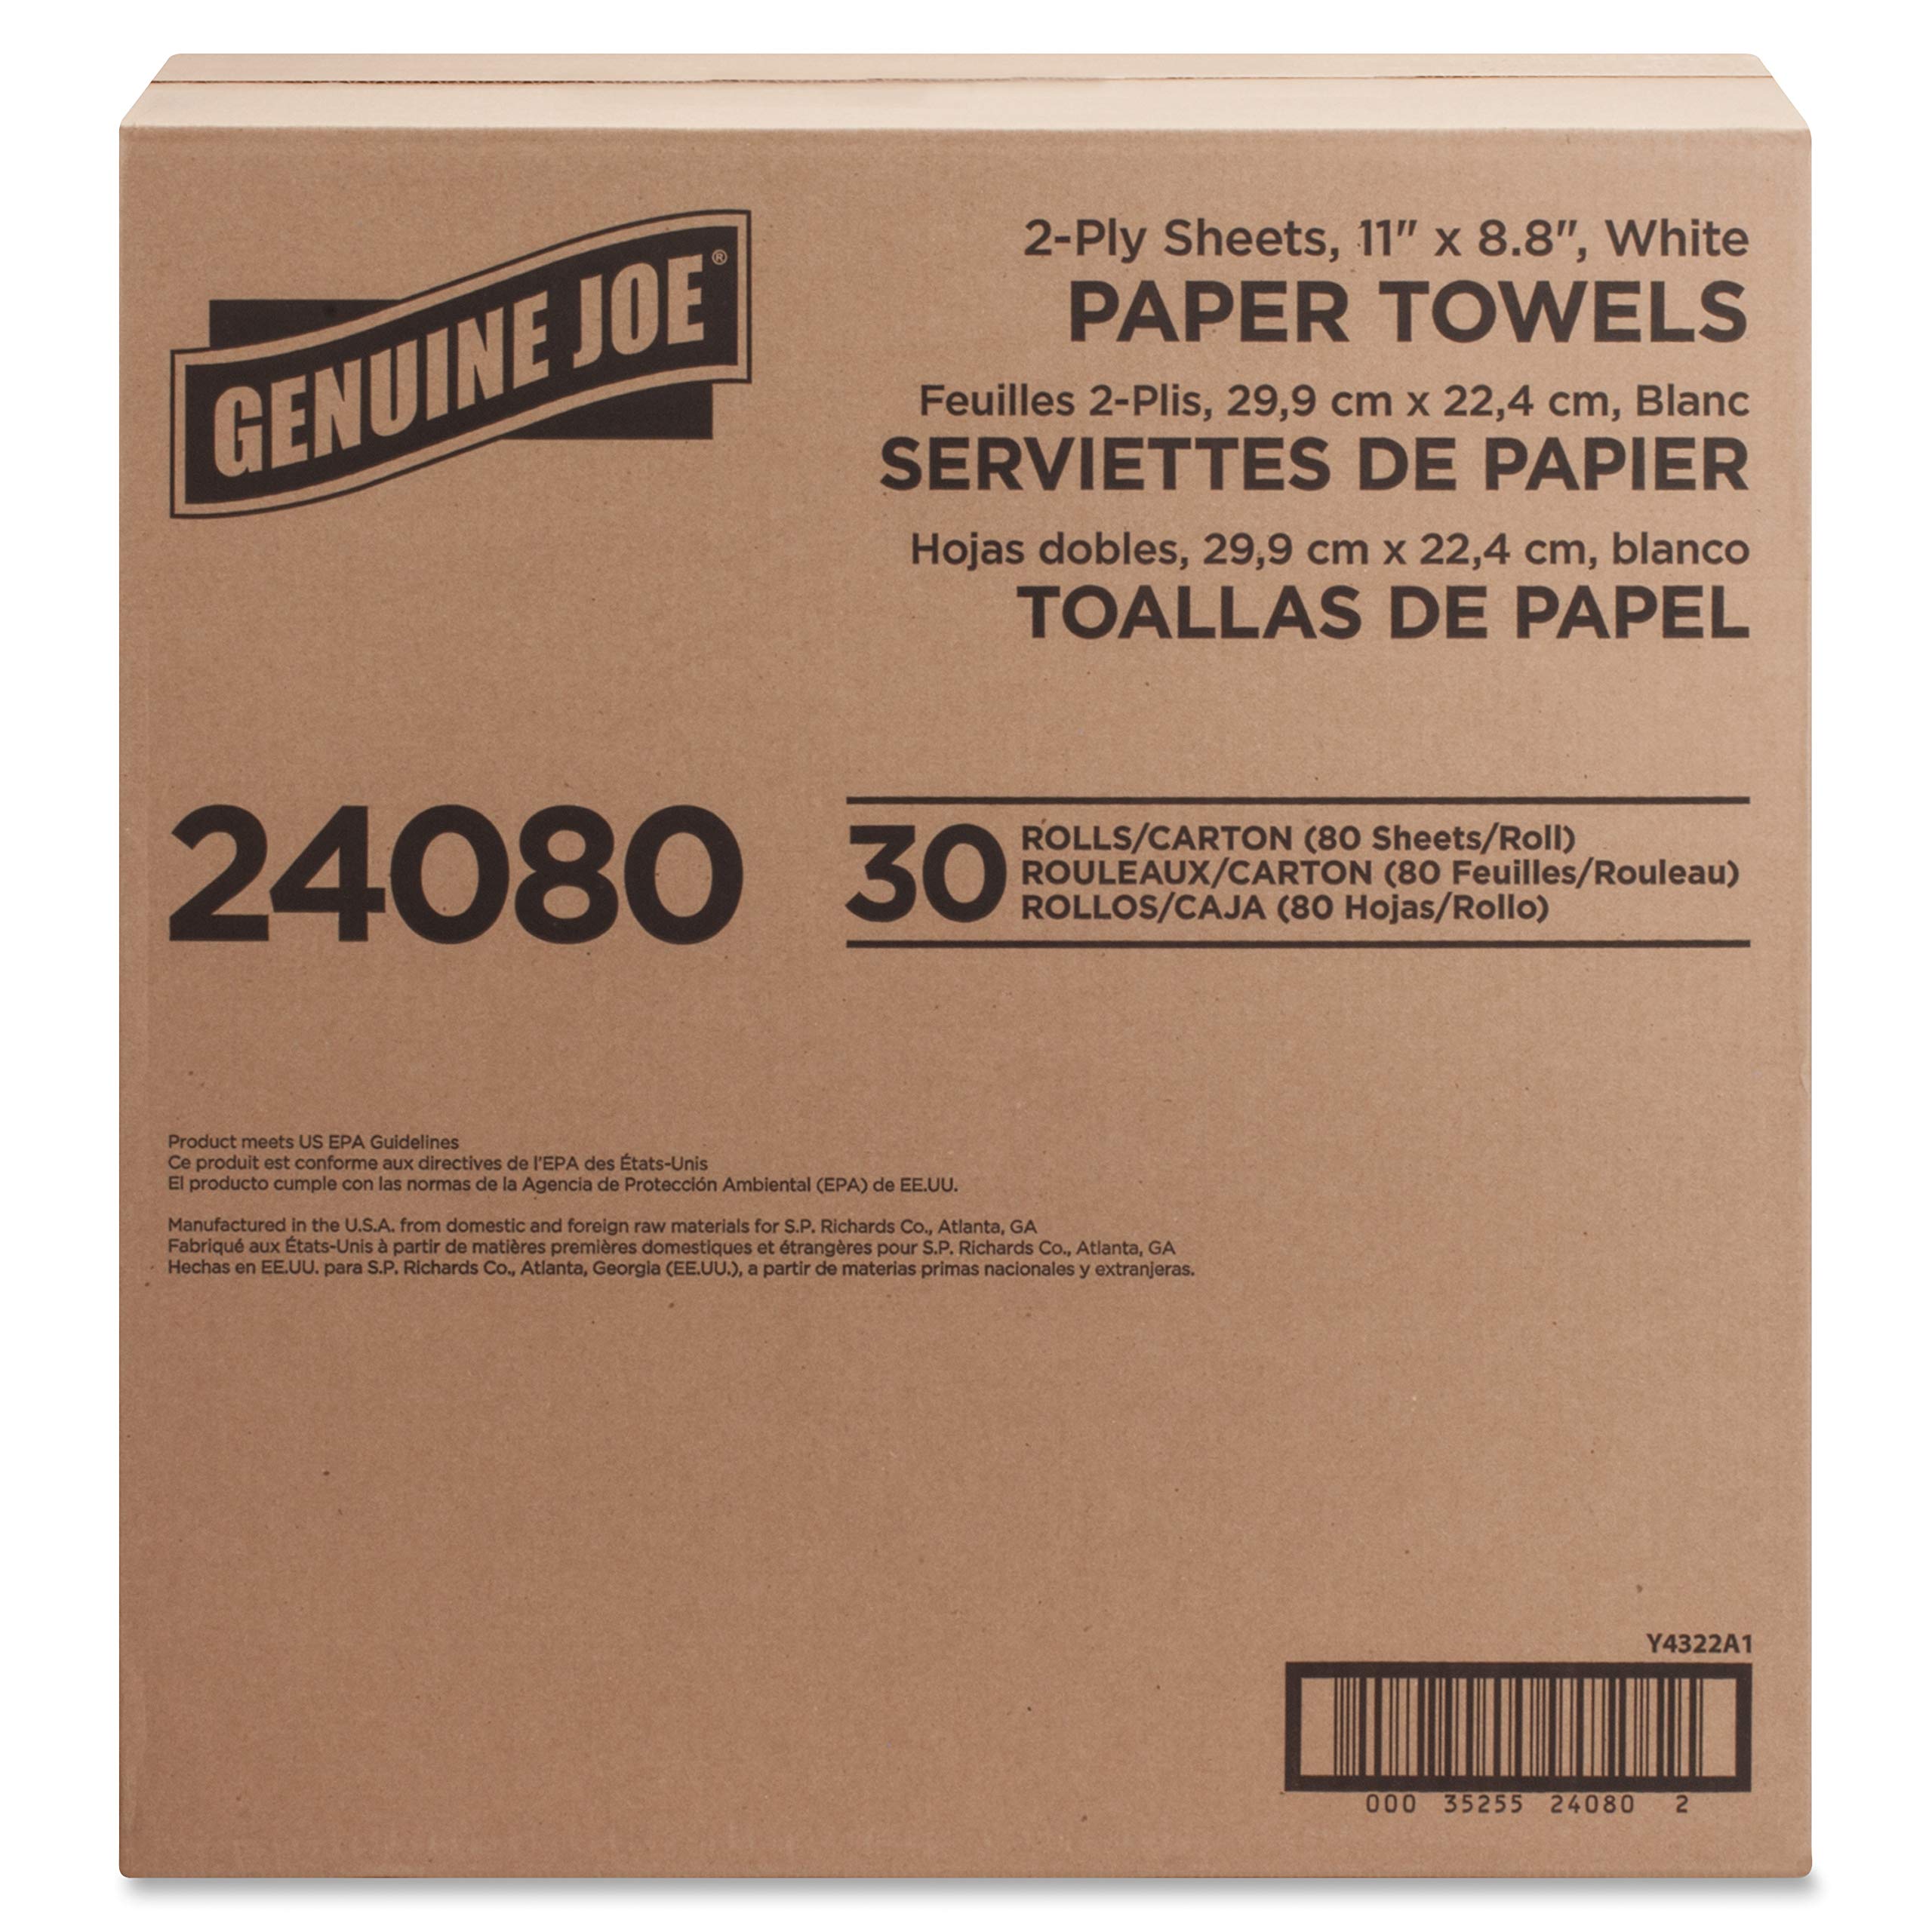 Paper Towels, 2-Ply, 80 Sheets/Roll - Parent (1)